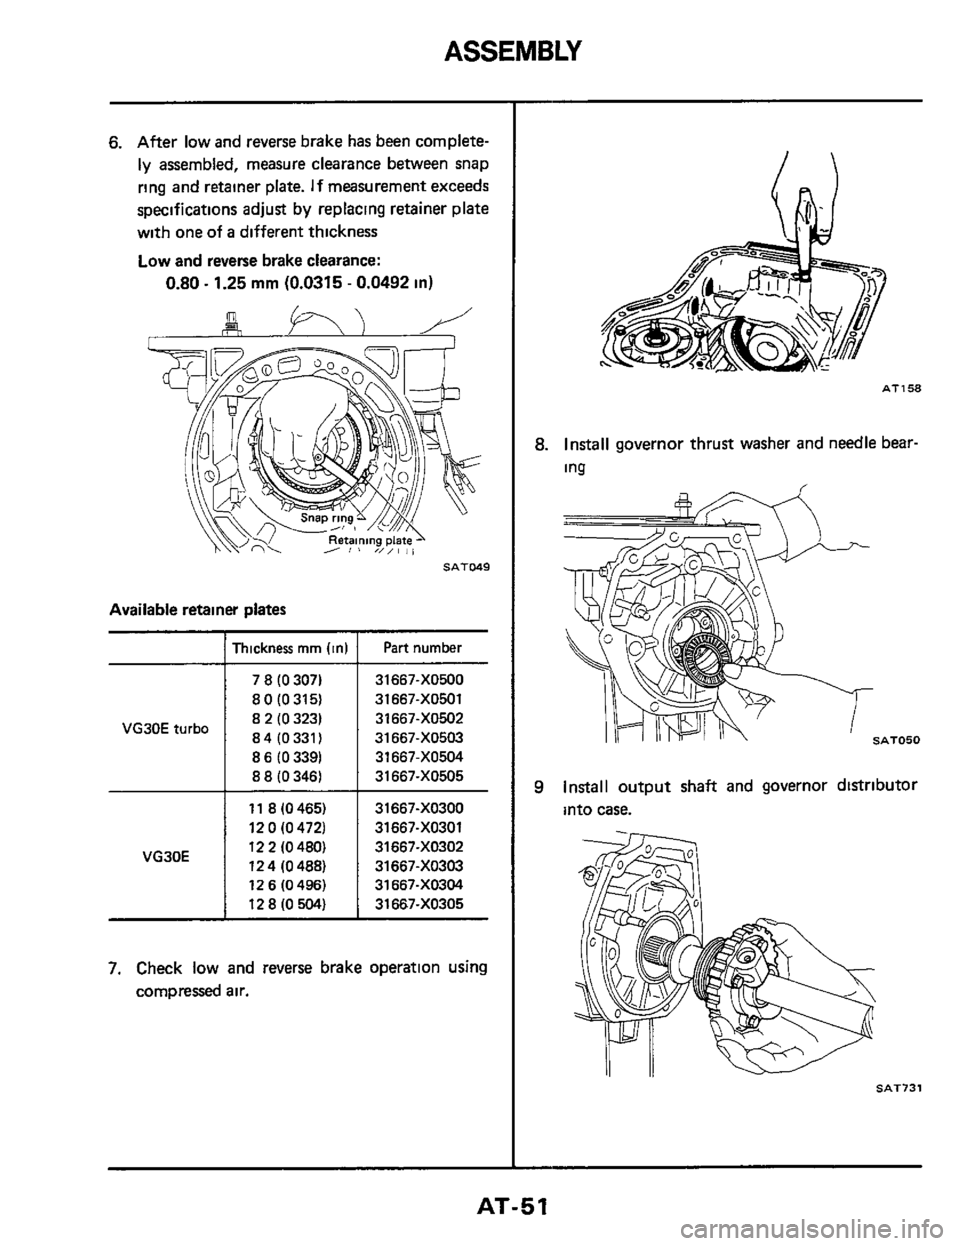 NISSAN 300ZX 1984 Z31 Automatic Transmission Repair Manual 90EOX-f9!31& rn&OX-L99 
LE 
&O&OX-f99LE 
ZOEOX-f99LE 
lOEOX-L99L& 
OOEOX-f991& 
(W90)8Zl 
(96V 
0) 9 Zl 
(88V 0) VZL 
(08V 0) Z Zl 
(ZfV 0) 0 ZL 
l99P 0) 8 11 
30EW 
9090X-L99LE I (9VE0) 88 I 
P09OX-f